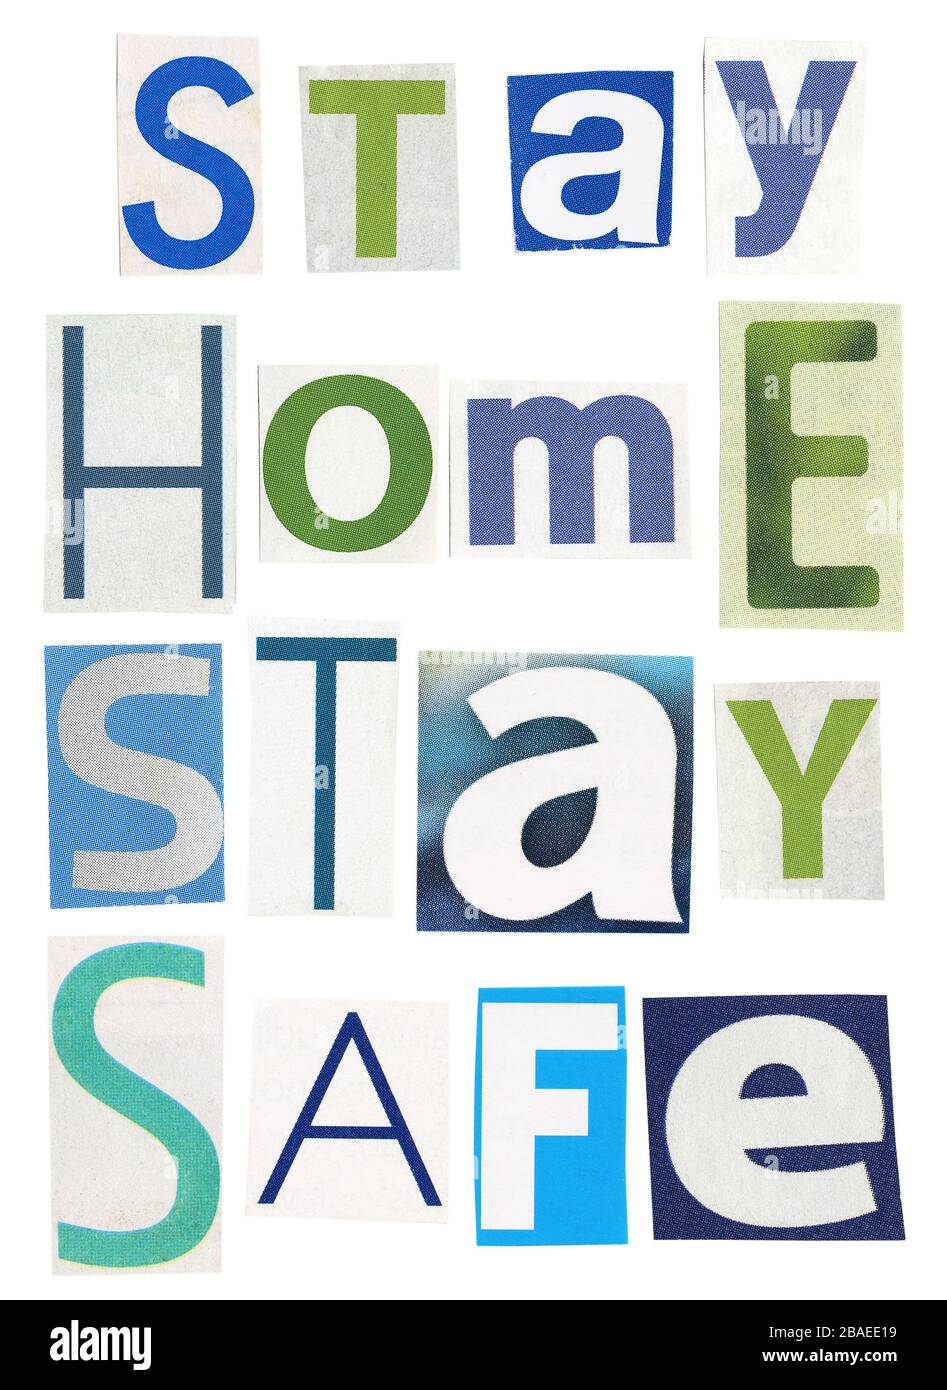 Stay home stay safe- text made of newspaper clippings isolated on white background. Newspaper letter typography poster with text for self quarantine t Stock Photo